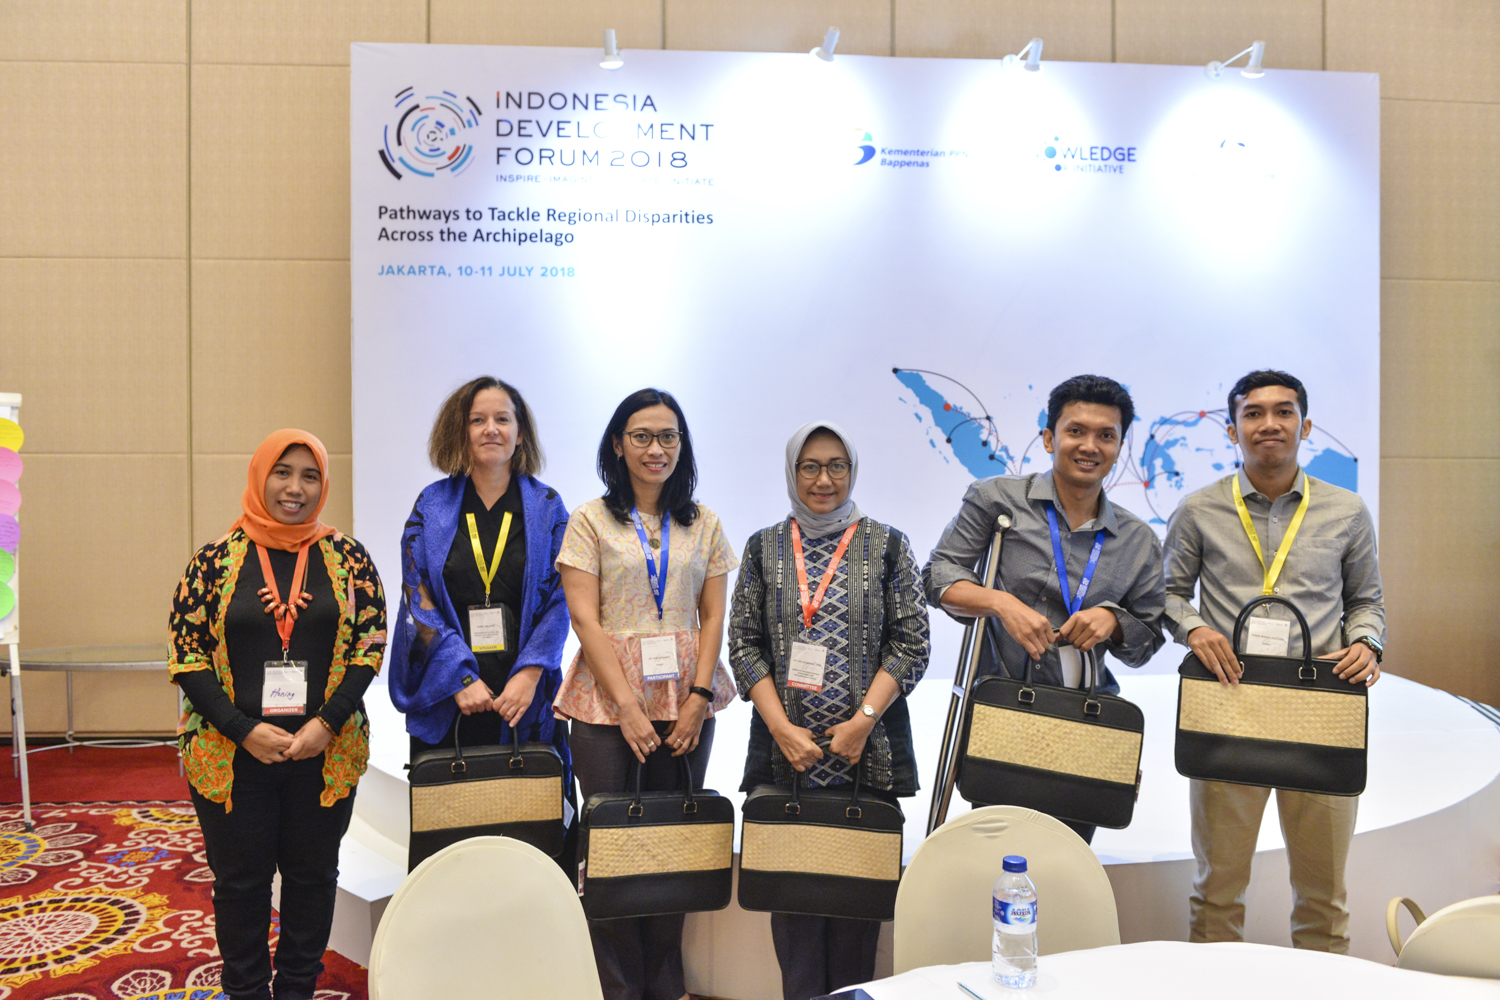 Special Session II: Disability, Policy and Services: Regional Disparities in the Indonesian and Australian Experience